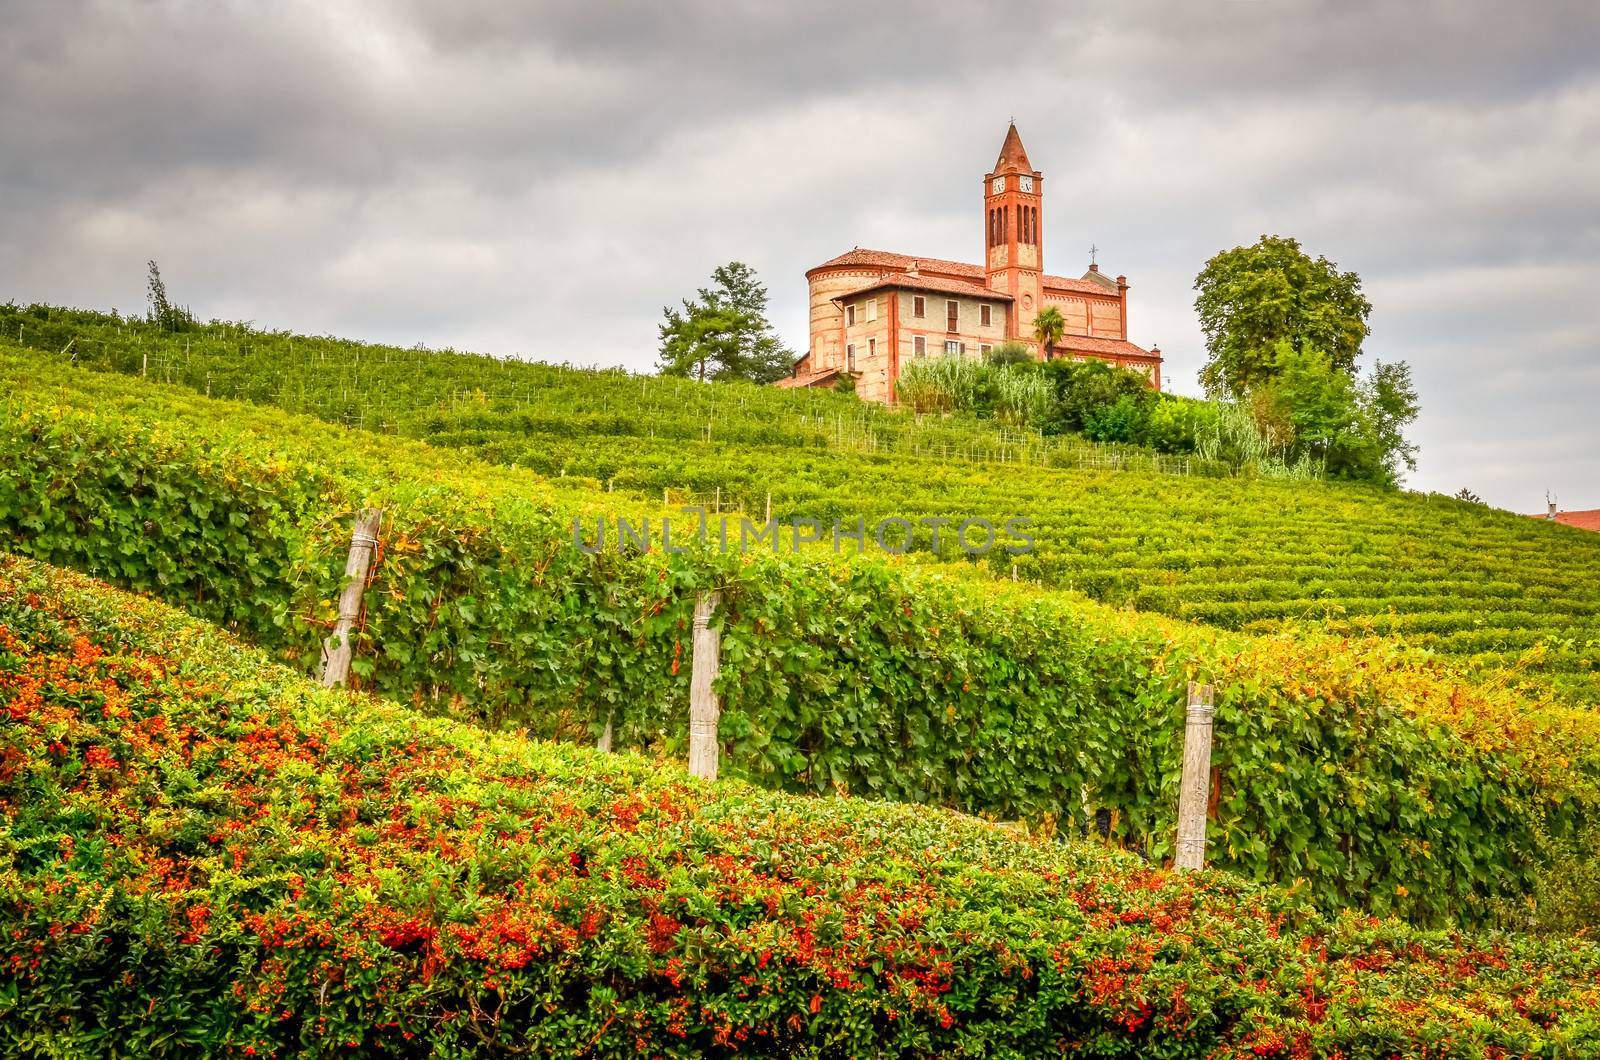 Landscape view of vineyards and old church in Piemont area, Ital by martinm303